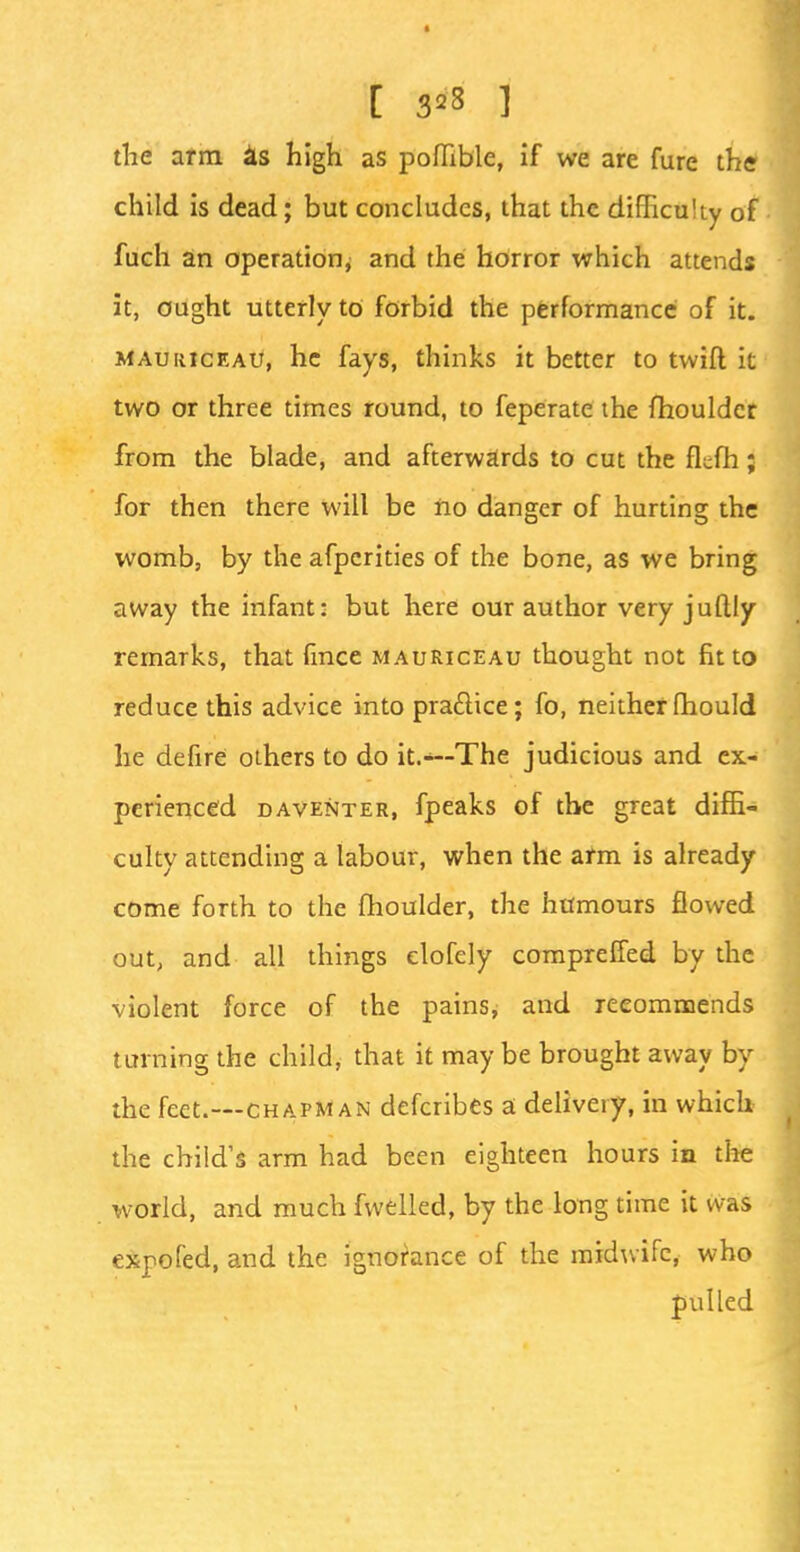 [ 3*8 ] the arm as high as poflible, if we are fure the child is dead; but concludes, that the difficulty of fuch an operation, and the horror which attends it, ought utterly to forbid the performance of it. mauriceau, he fays, thinks it better to twill it two or three times round, to feperate the fhouldcr from the blade, and afterwards to cut the flcfh; for then there will be iio danger of hurting the womb, by the afperities of the bone, as we bring away the infant: but here our author very jufljy remarks, that fince mauriceau thought not fit to reduce this advice into practice; fo, neitherfhould he defire others to do it.-—The judicious and ex- perienced daventer, fpeaks of the great diffi- culty attending a labour, when the arm is already come forth to the fhoulder, the humours flowed out, and all things elofely compreffed by the violent force of the pains, and recommends turning the child, that it may be brought away by the feet.—chapman defcribes a delivery, in which the child's arm had been eighteen hours in the world, and much fwelled, by the long time it was expofed, and the ignorance of the midwife, who pulled